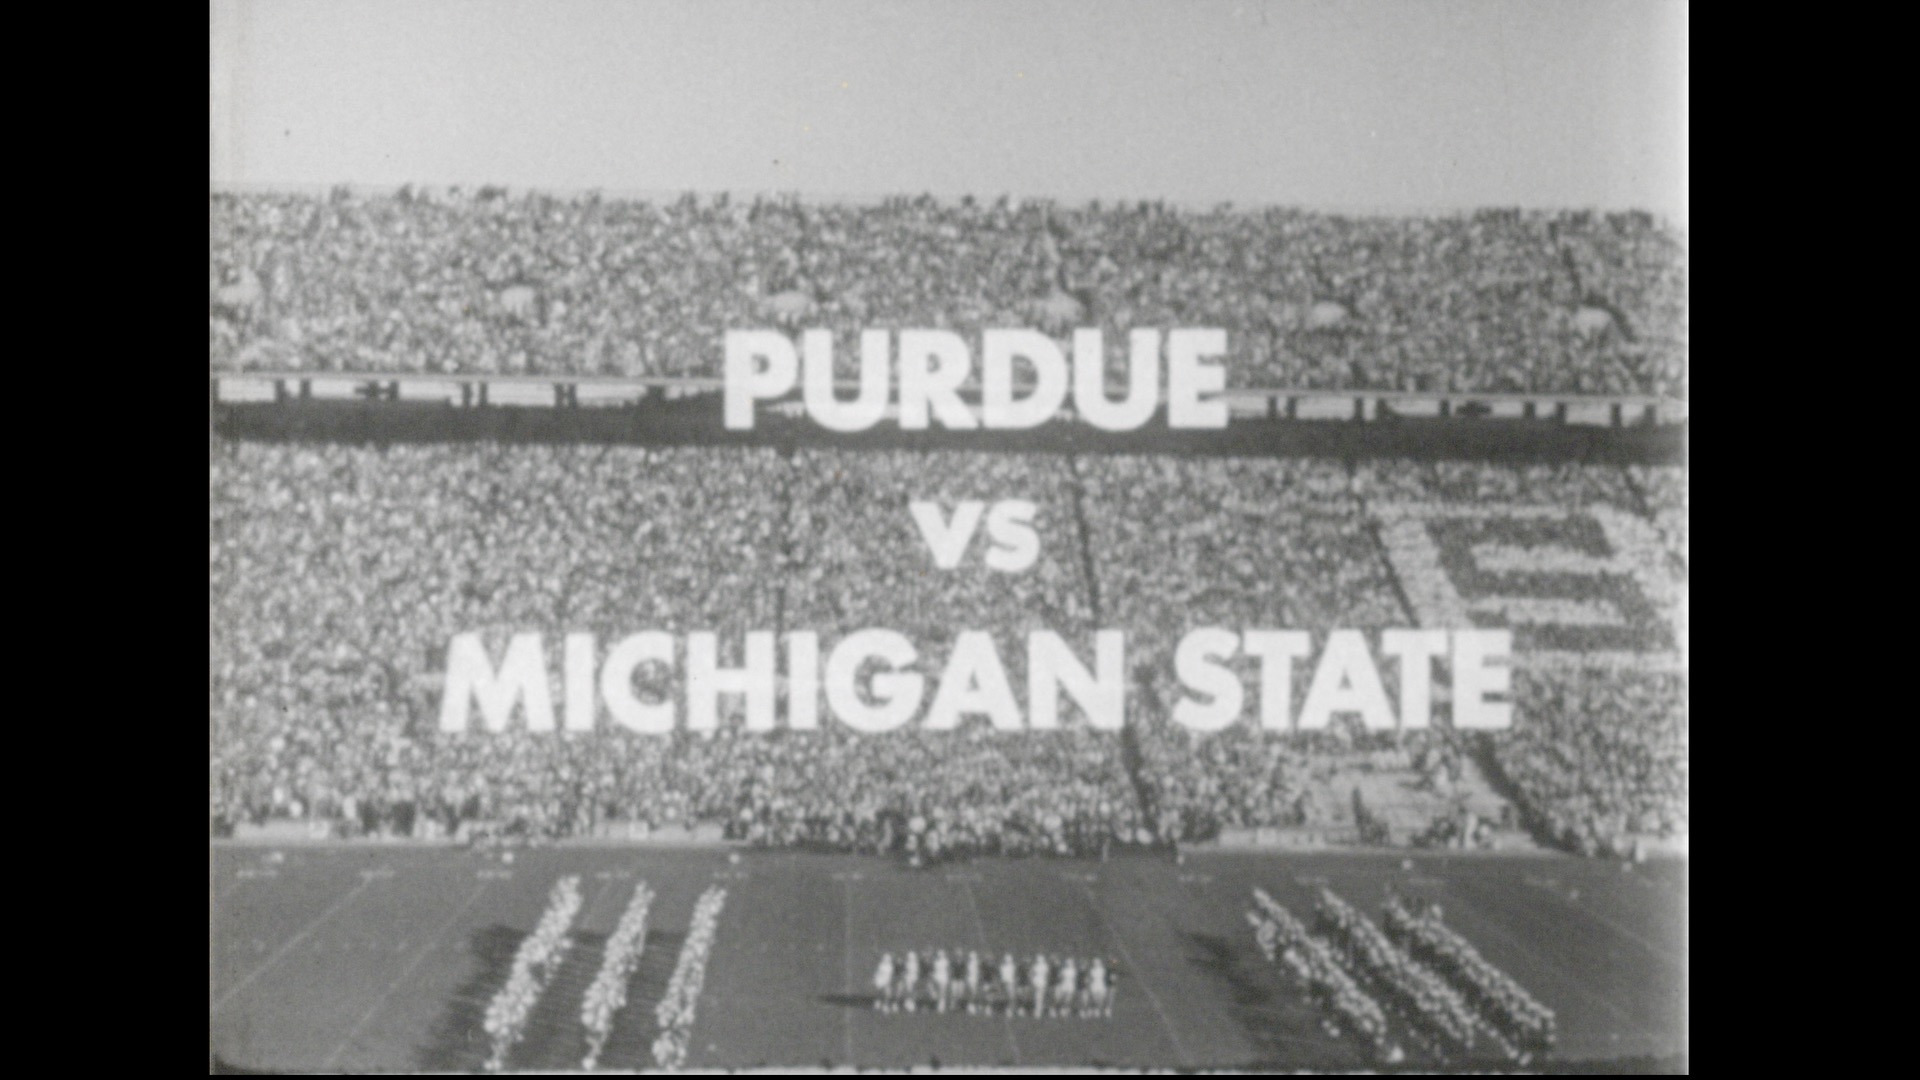 MSU Football vs. Purdue and Notre Dame, 1957 (highlights)